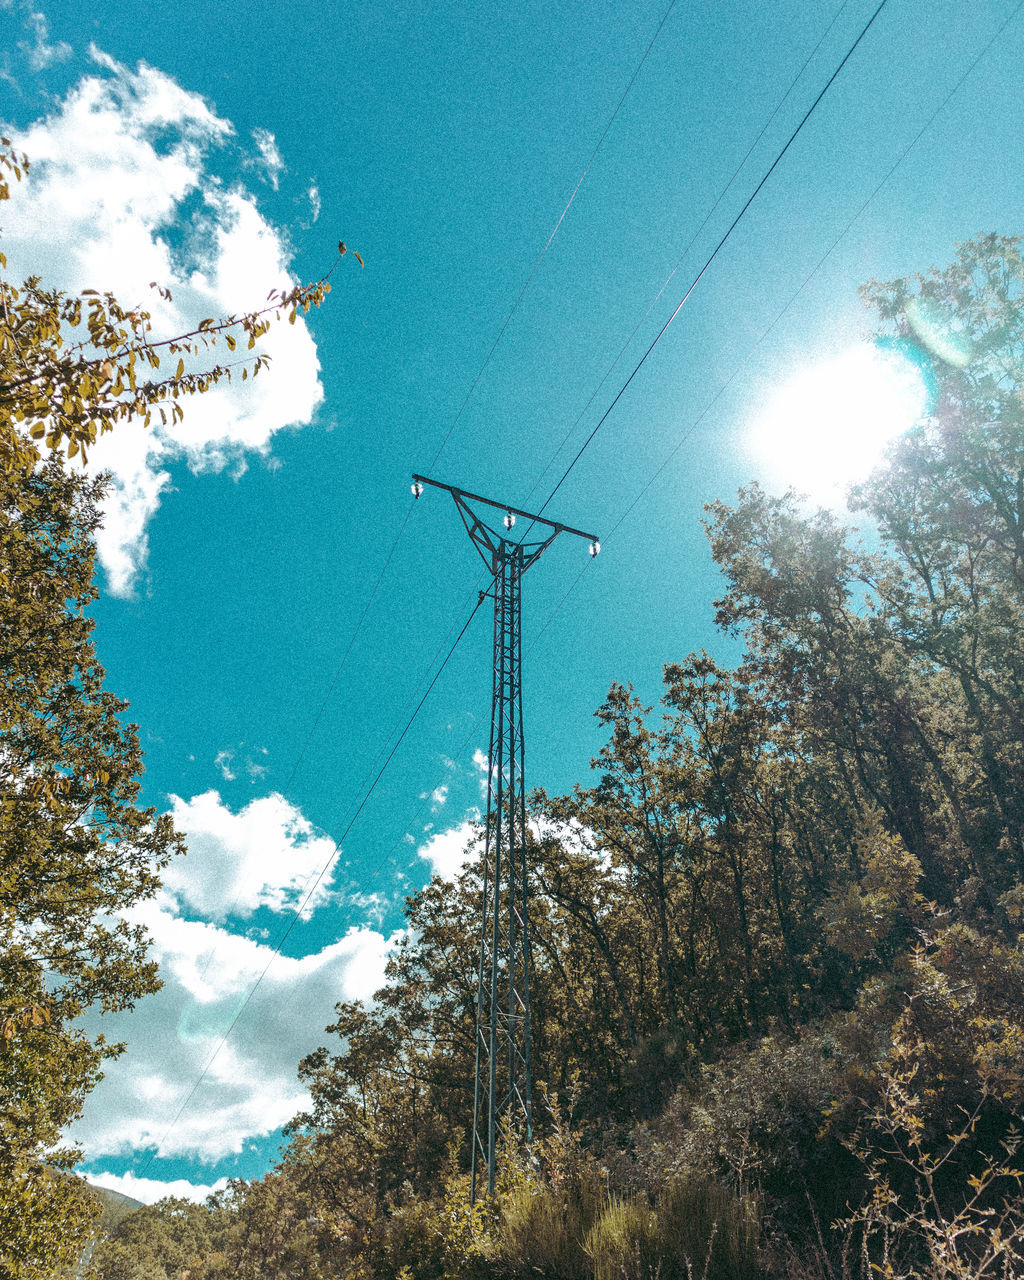 sky, electricity, cable, plant, tree, low angle view, nature, power line, technology, electricity pylon, cloud, power supply, power generation, no people, growth, day, sunlight, beauty in nature, outdoors, blue, wind, overhead power line, land, scenics - nature, tranquility